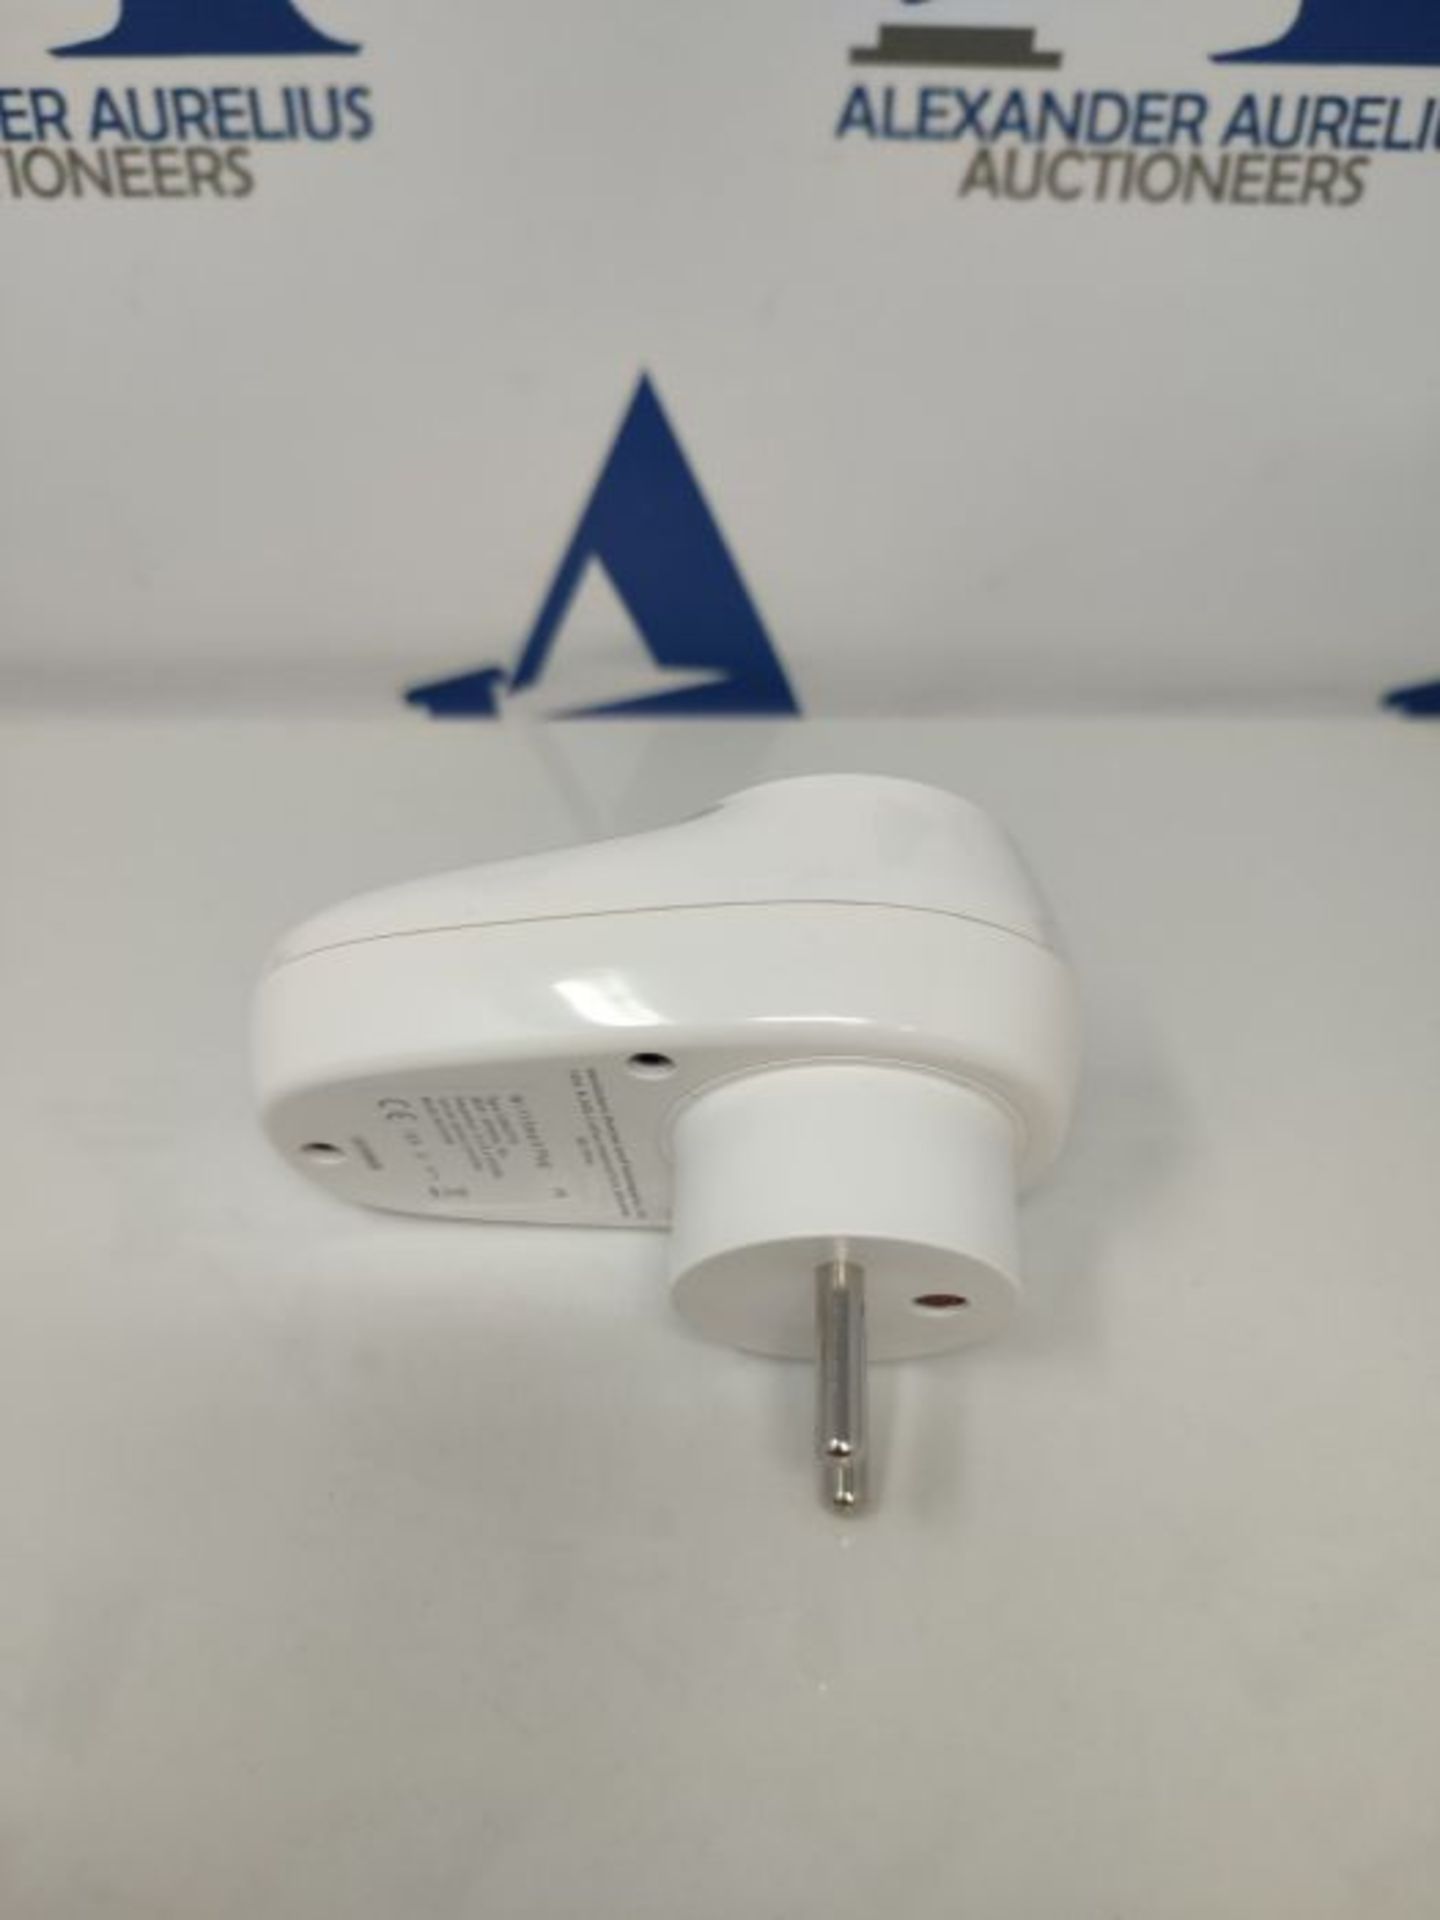 SONOFF S26R2 TPE-FR Smart Plug, Compatible with Alexa, Google Home, 16A Power Sockets - Image 3 of 3